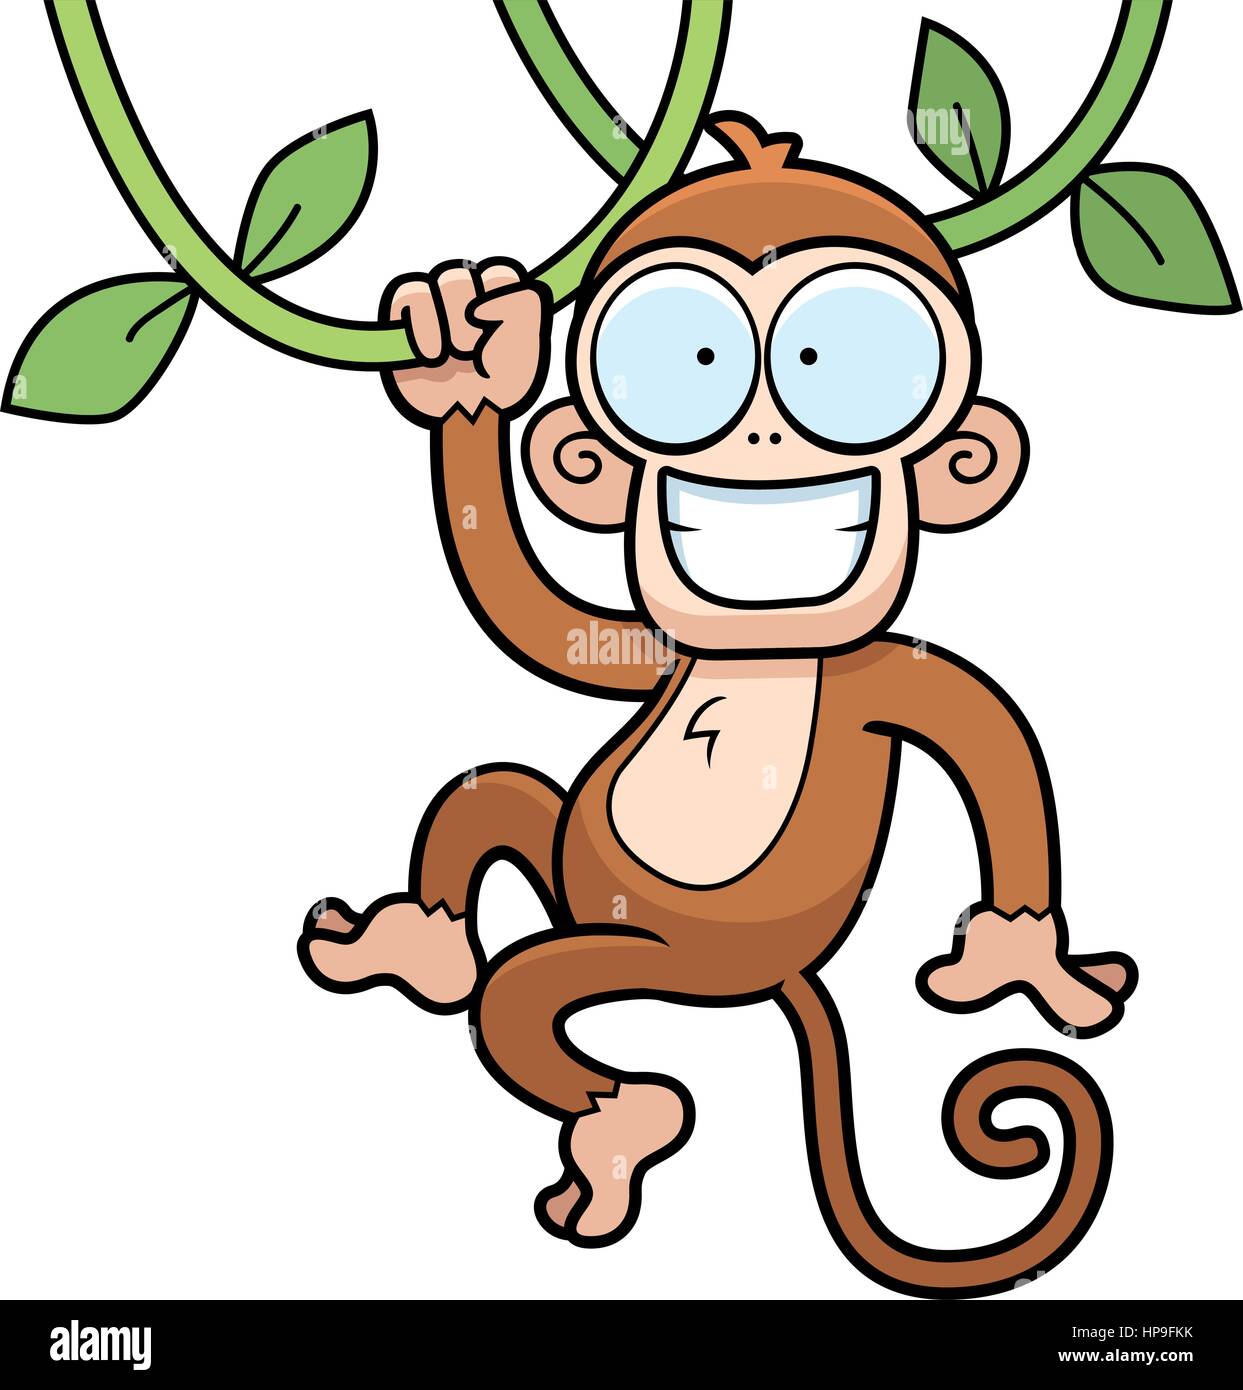 A cartoon monkey hanging from vines and smiling. Stock Vector